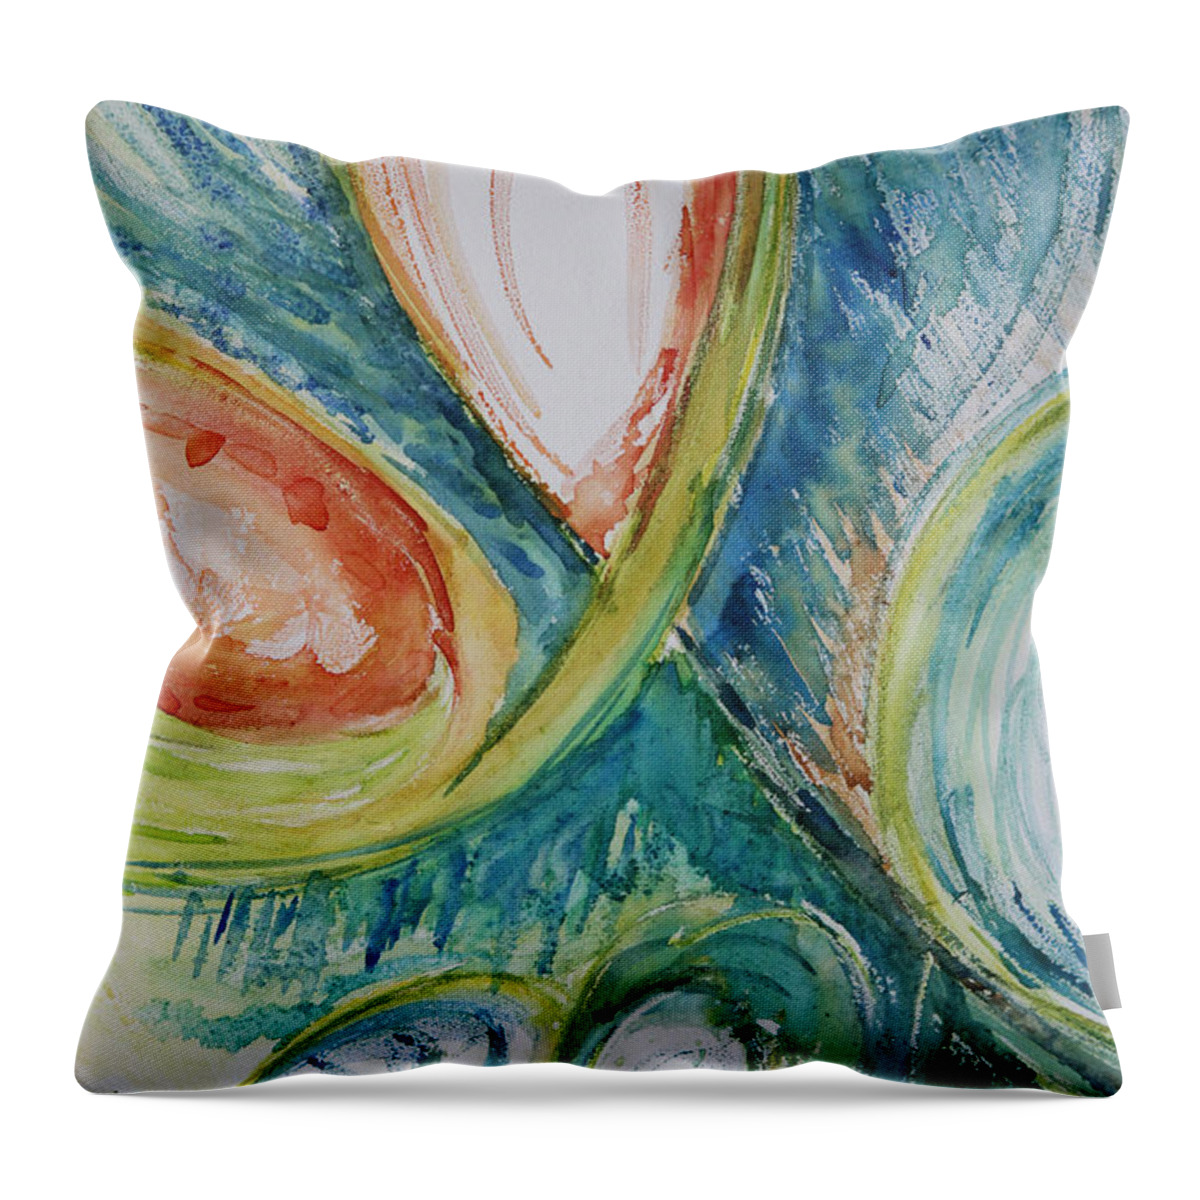 Watercolor Painting Throw Pillow featuring the painting Abstract Chaos by Carrie Godwin